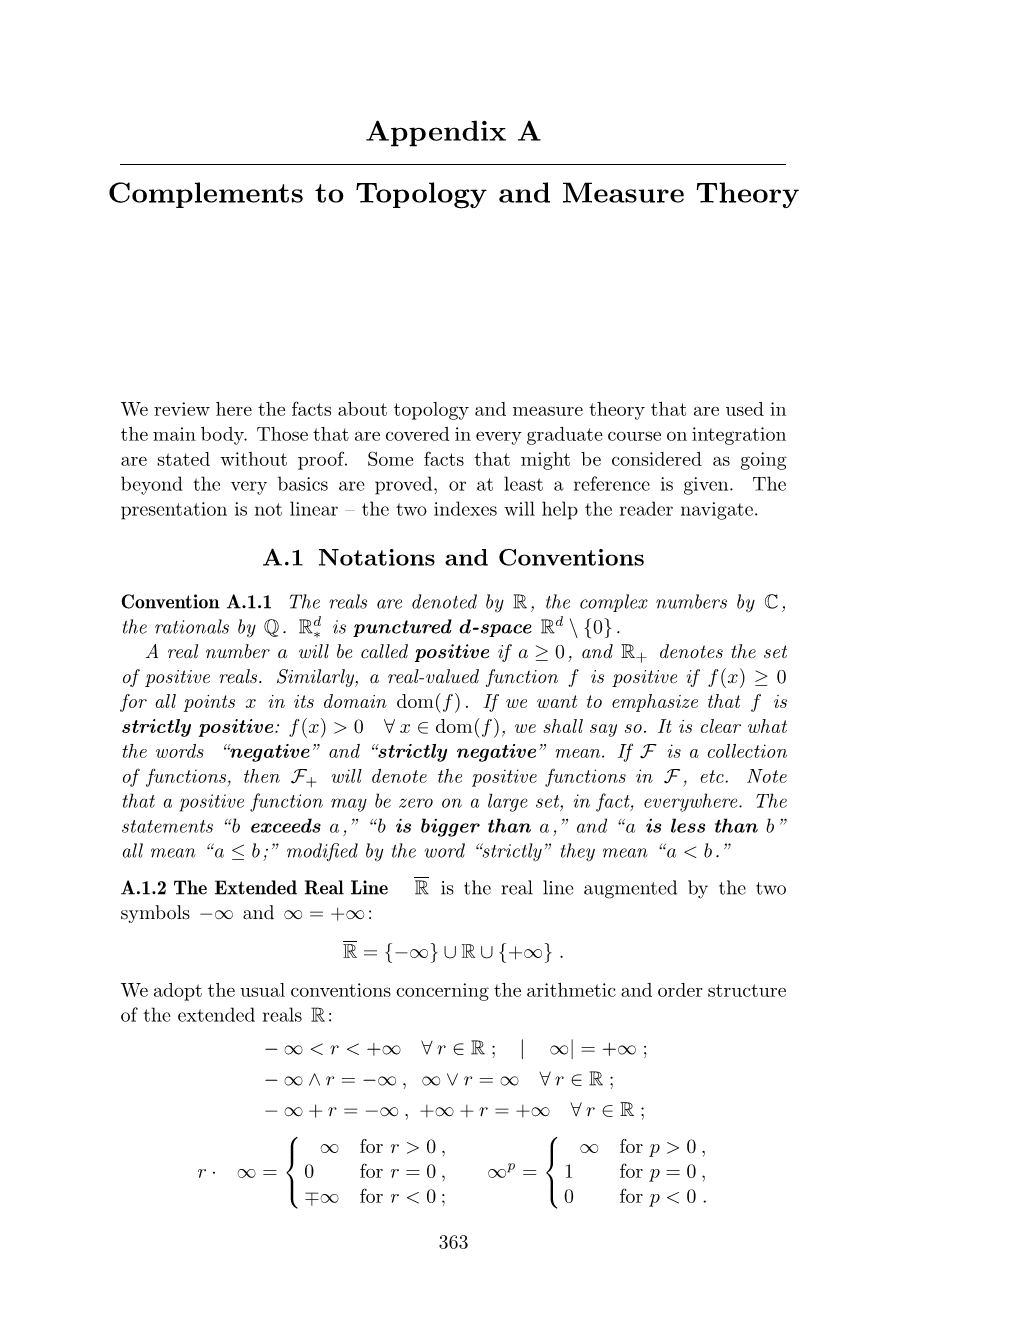 Appendix a Complements to Topology and Measure Theory